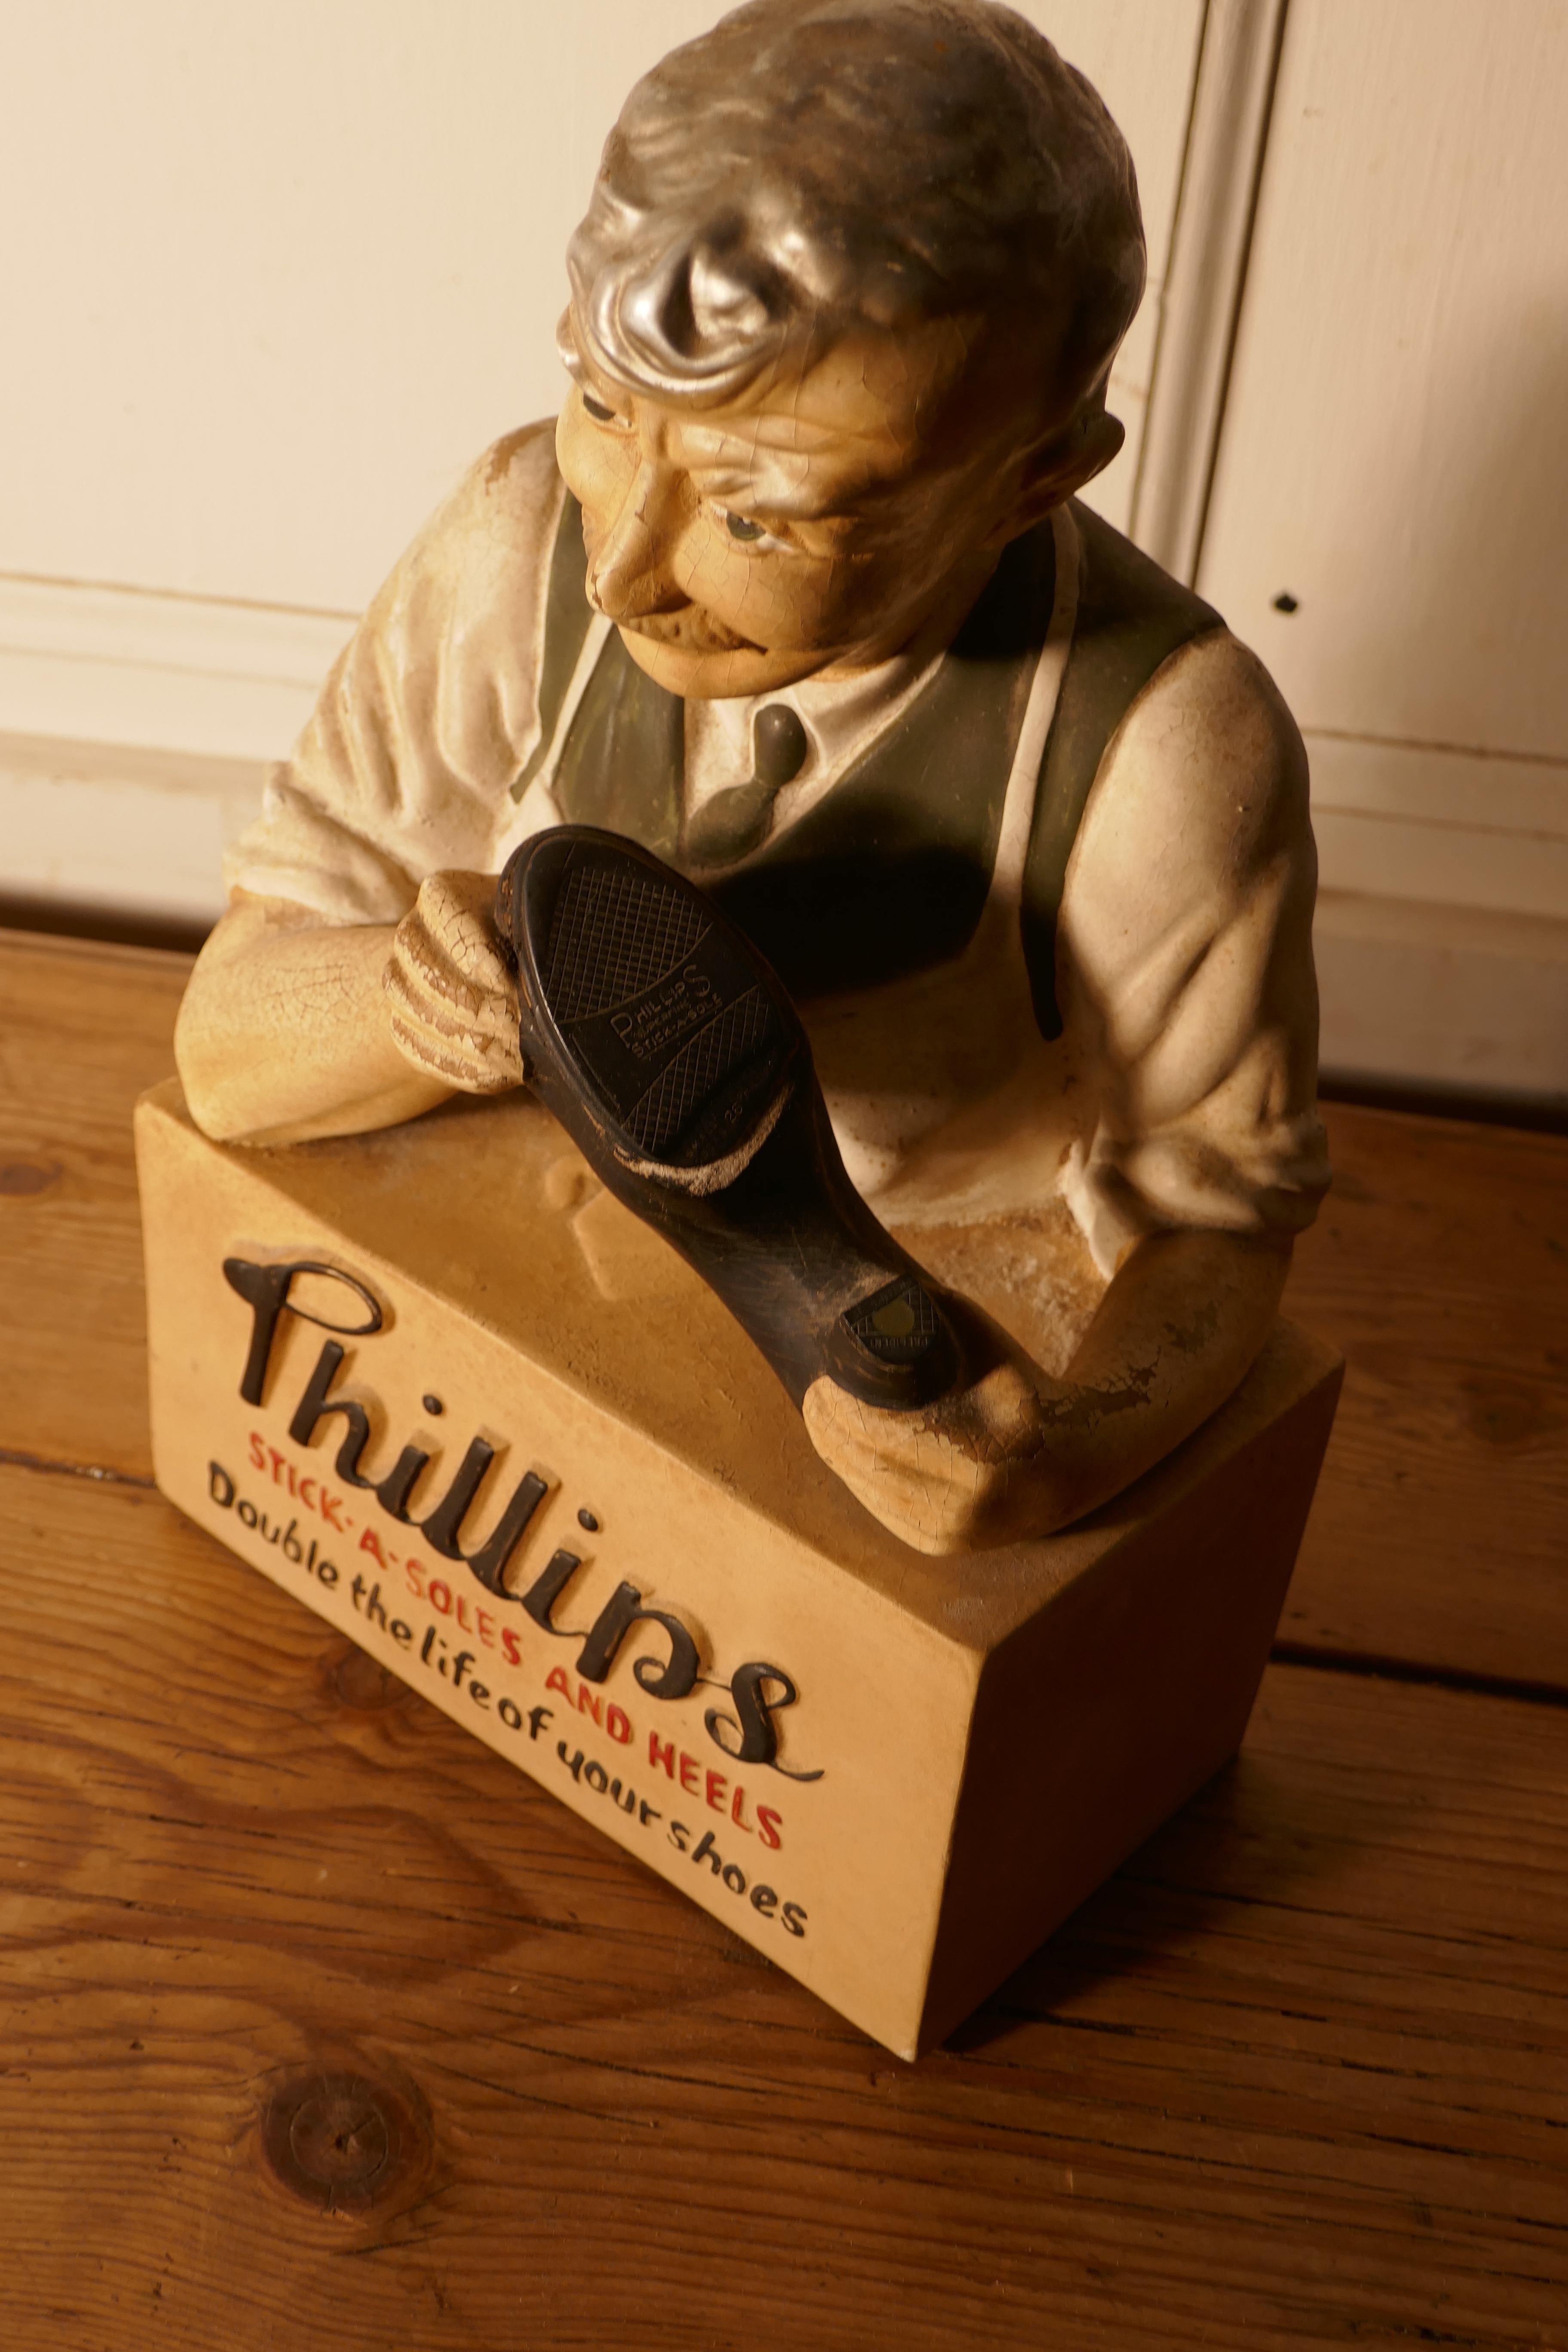 20th Century Phillips Stick a Soles and Heels Cobblers Shop Advertising Display Model For Sale